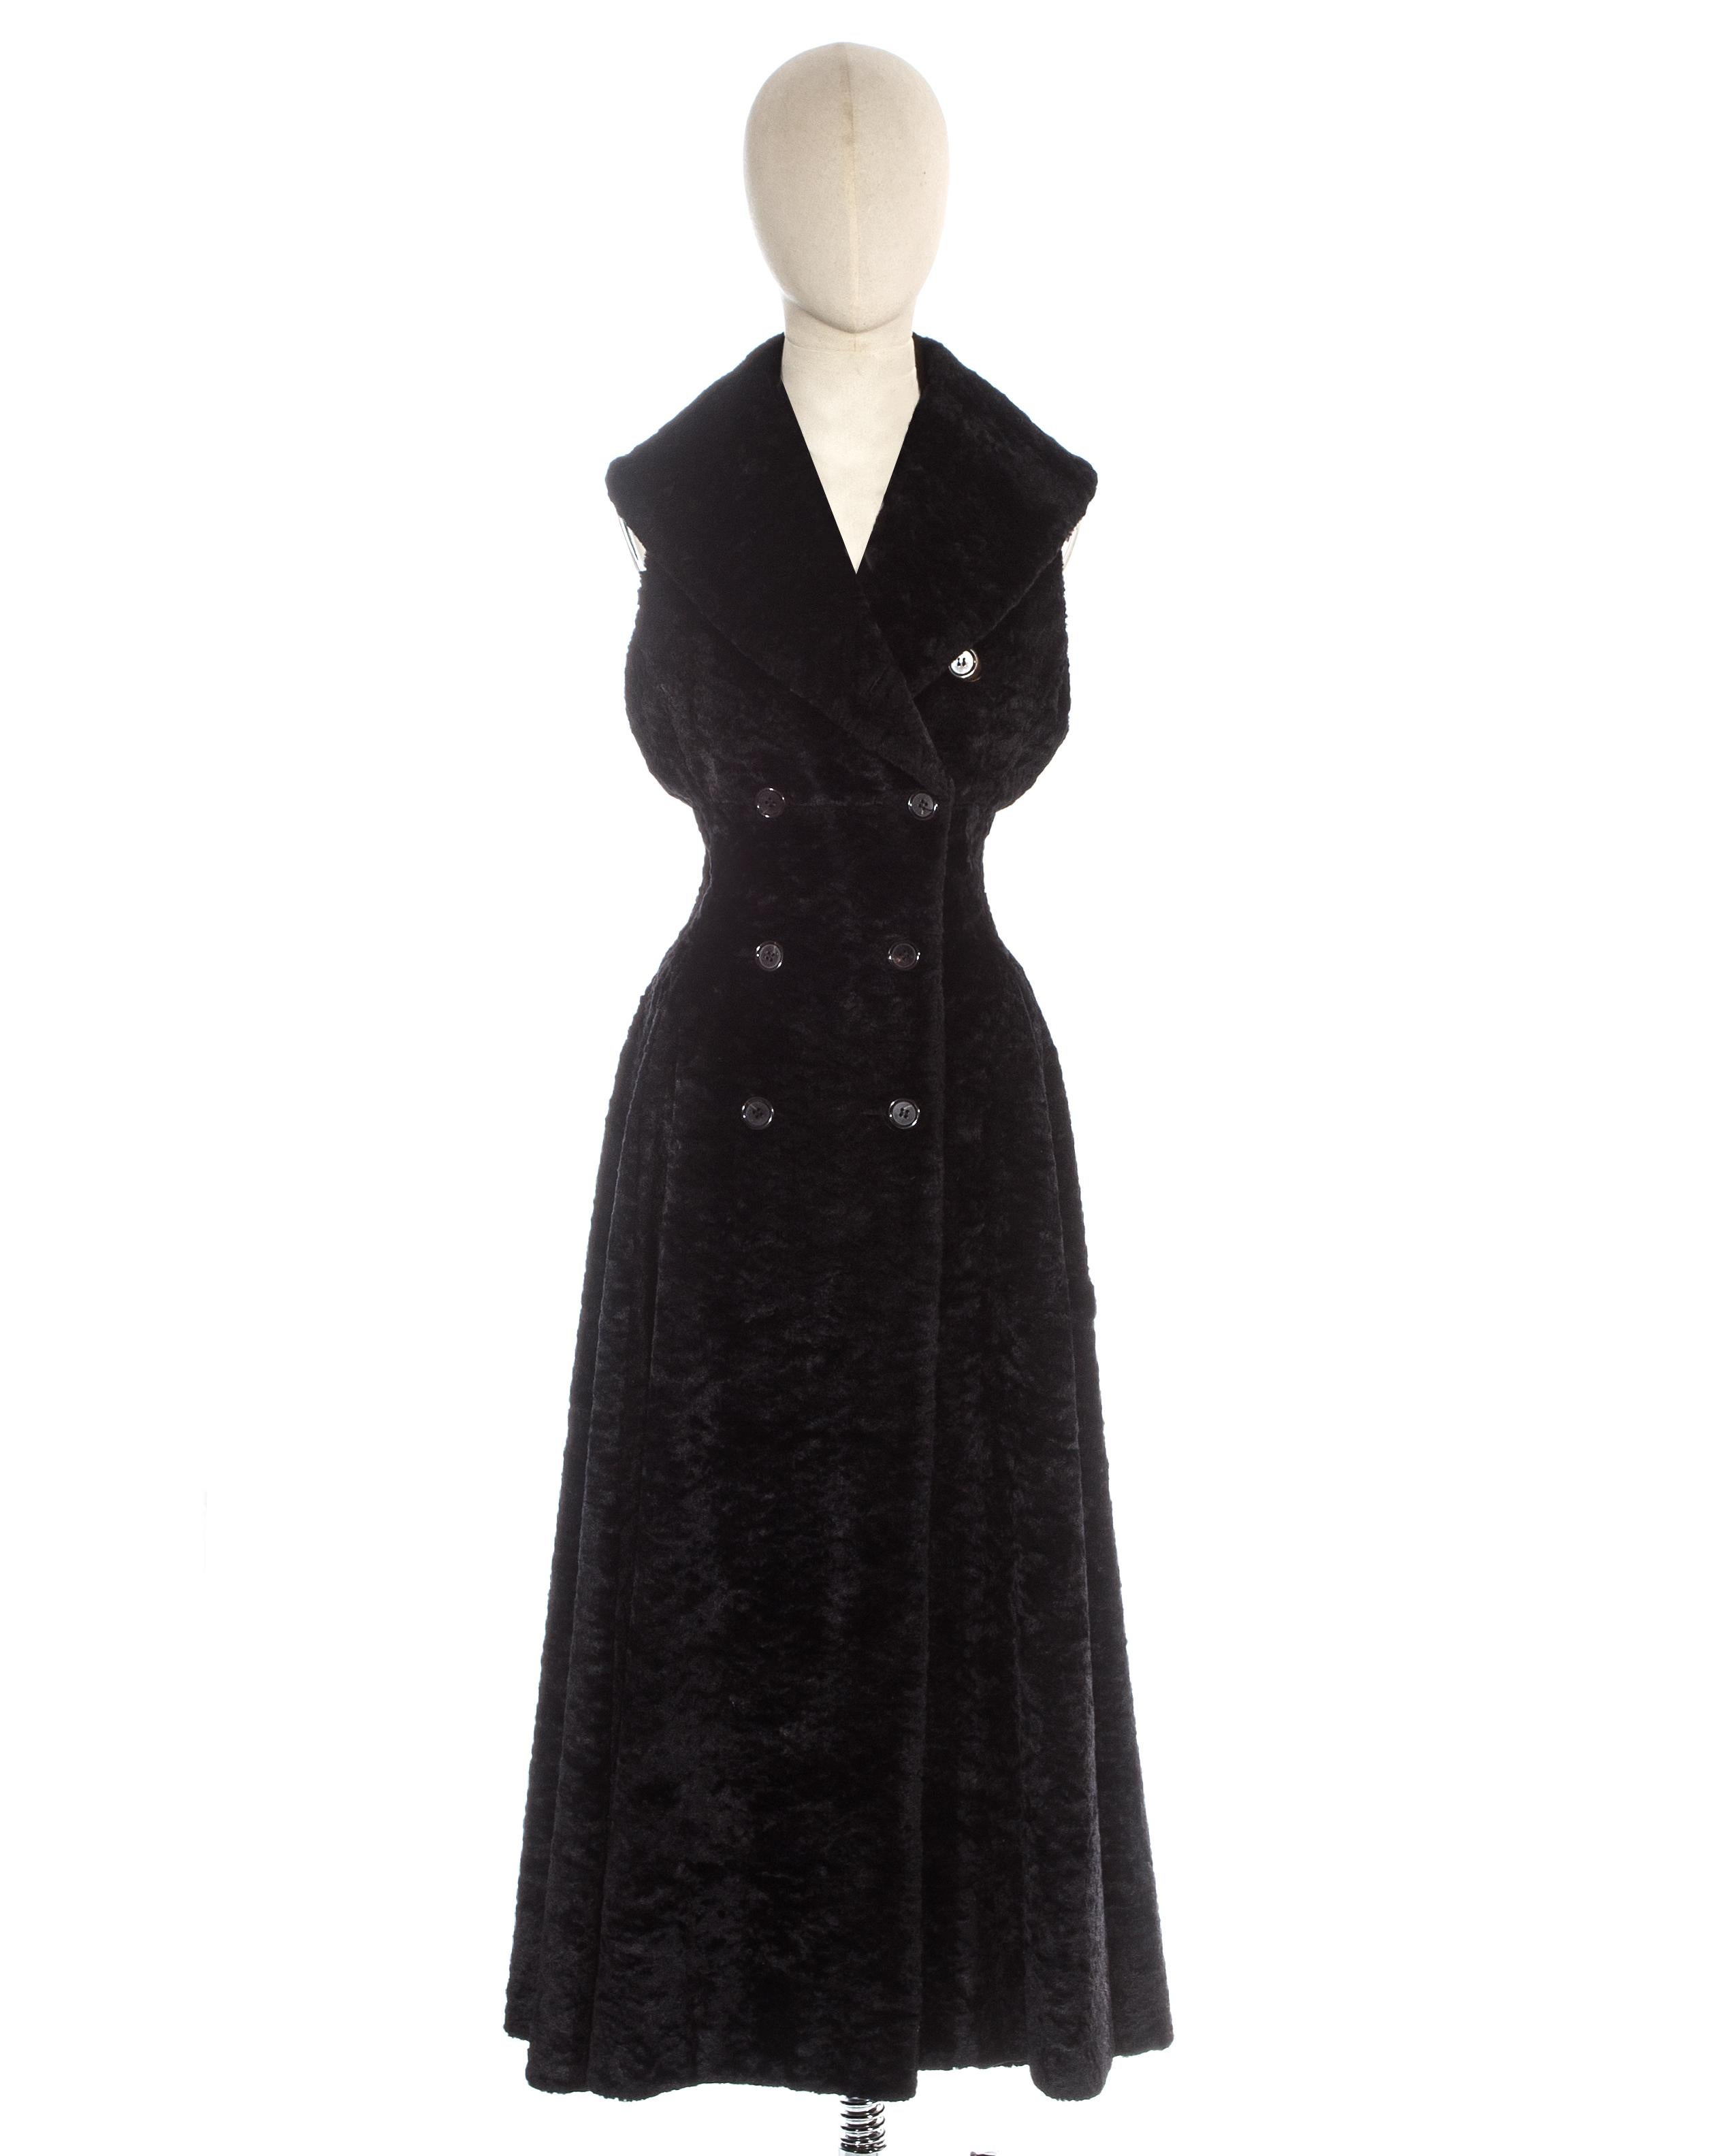 Azzedine Alaia; black chenille sleeveless double breasted coat dress with silk lining, large shawl lapel, full pleated skirt, cinched waist and 2 hidden side pockets. 

Fall-Winter 1992

Measurements:

Shoulder to shoulder 12”
Waist 26”
Bust